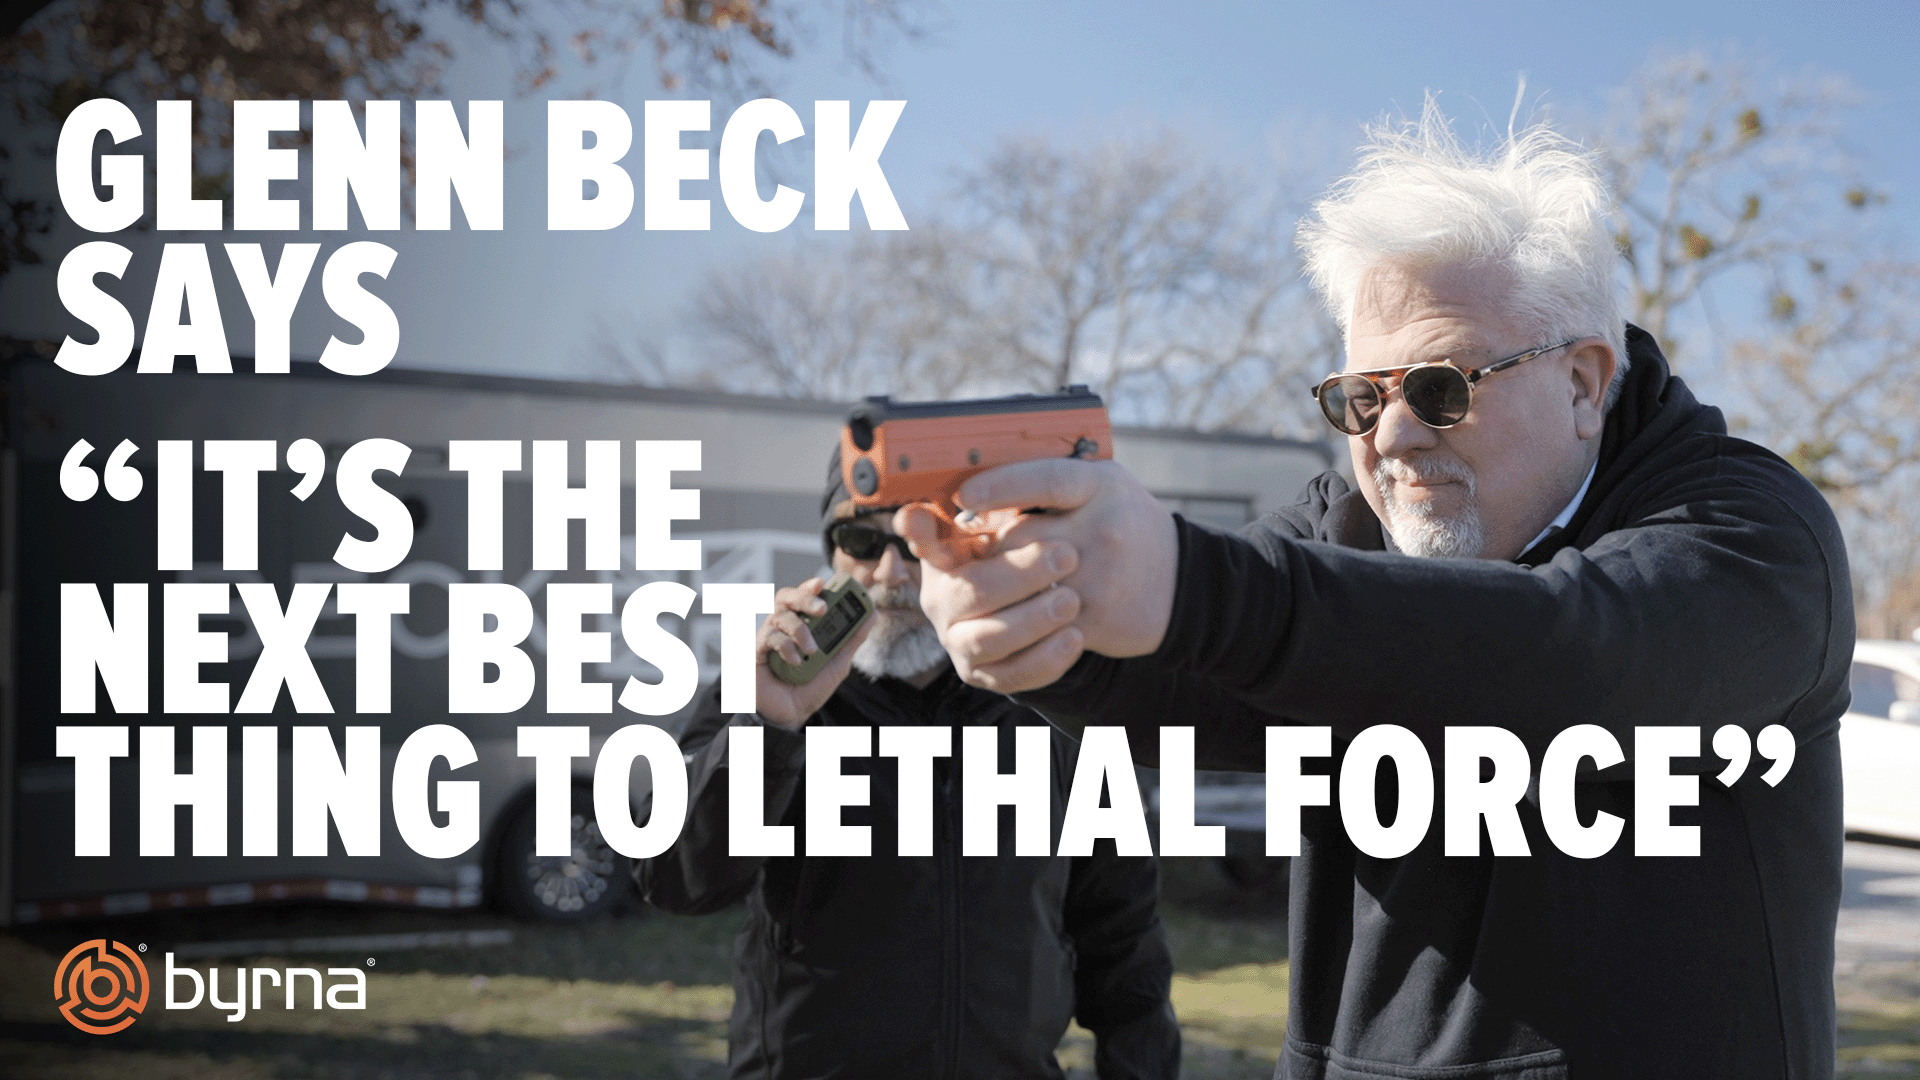 Glenn Beck Says "It's The Next Best Thing To Lethal Force"